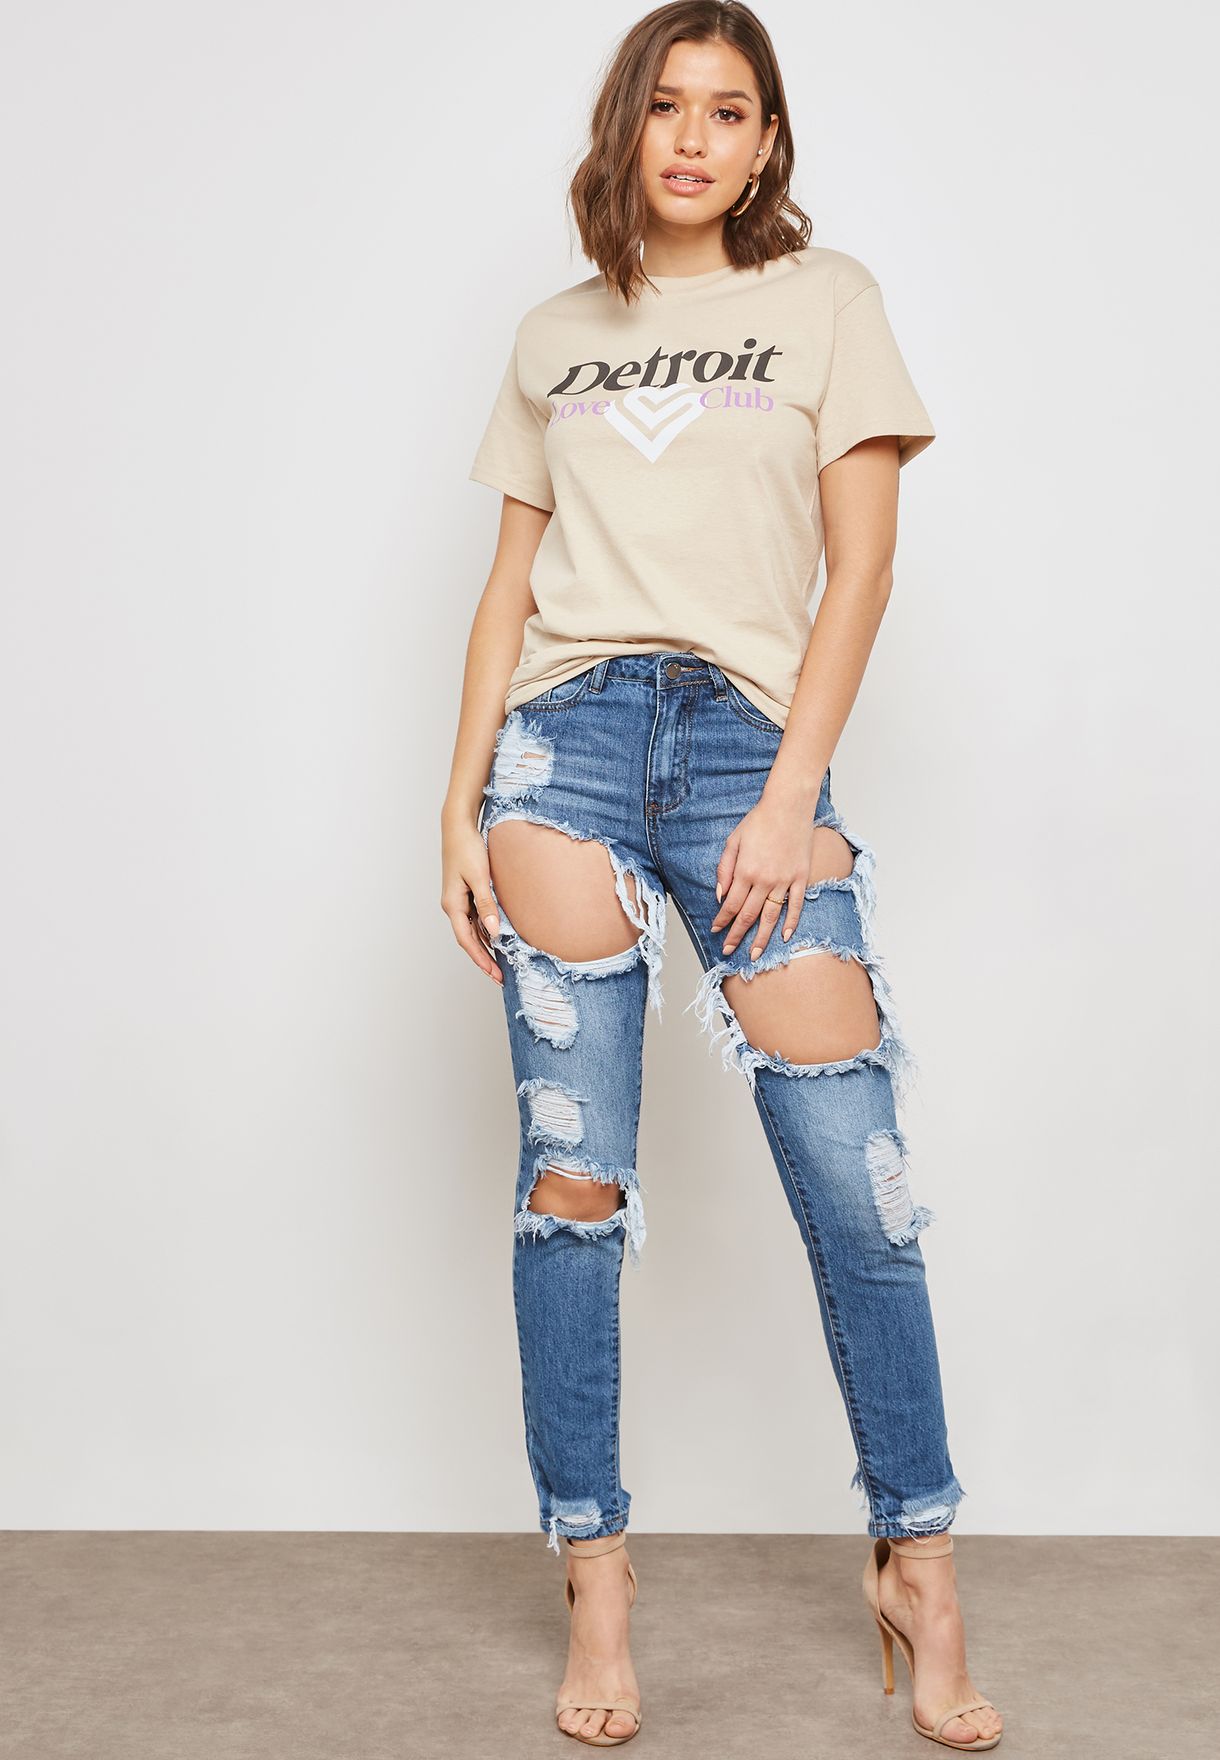 missguided blue ripped jeans